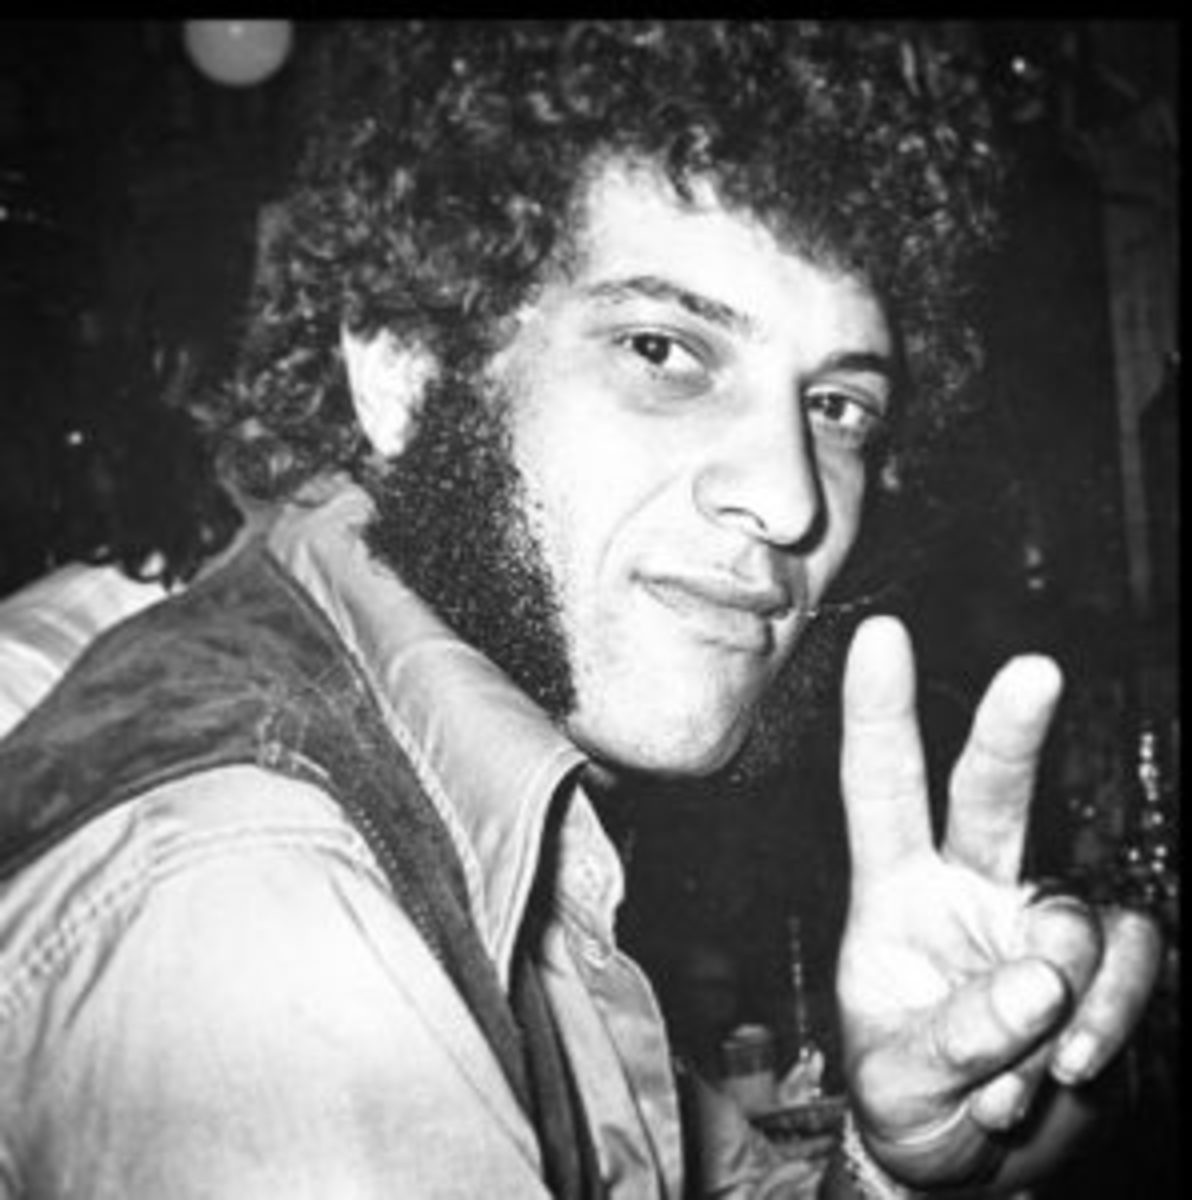  Ray Dorset in a 1970 photo. Courtesy of www.mungojerry.com